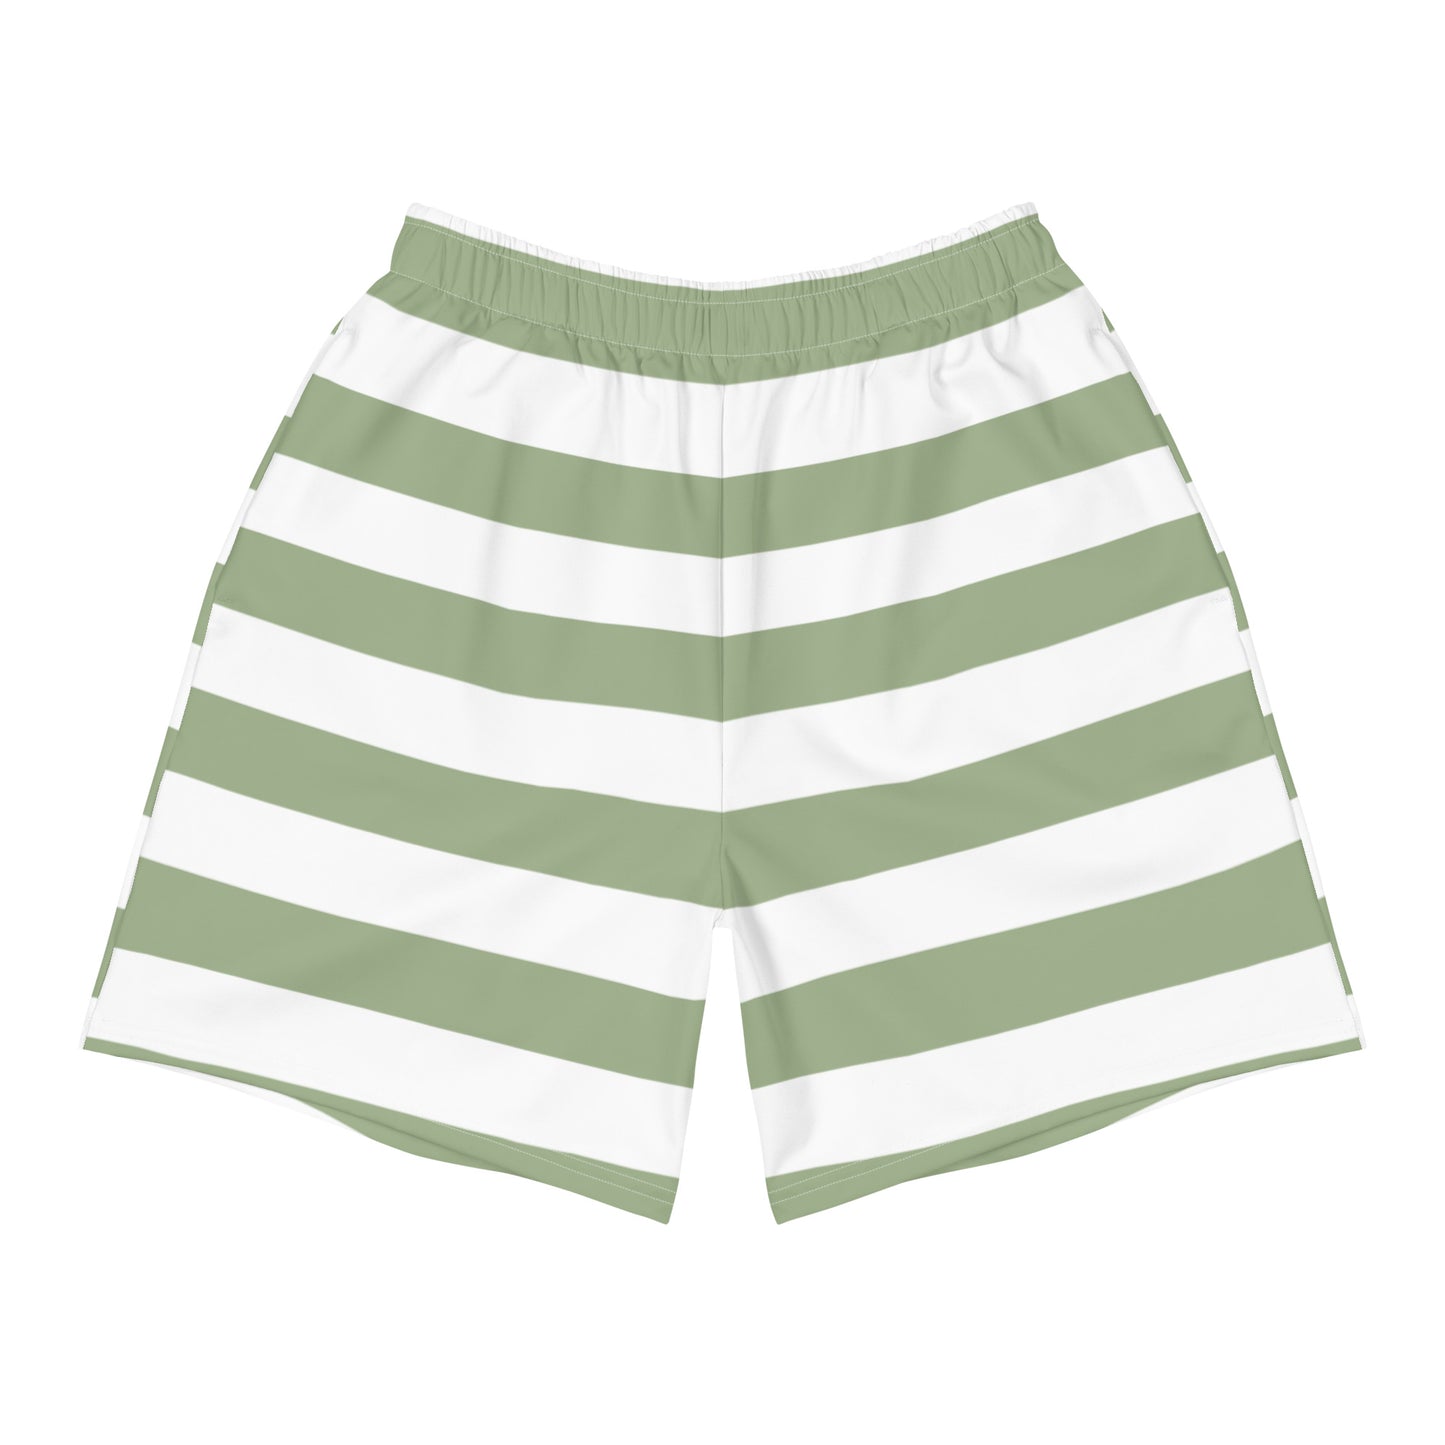 Sailor Olive - Sustainably Made Men's Short